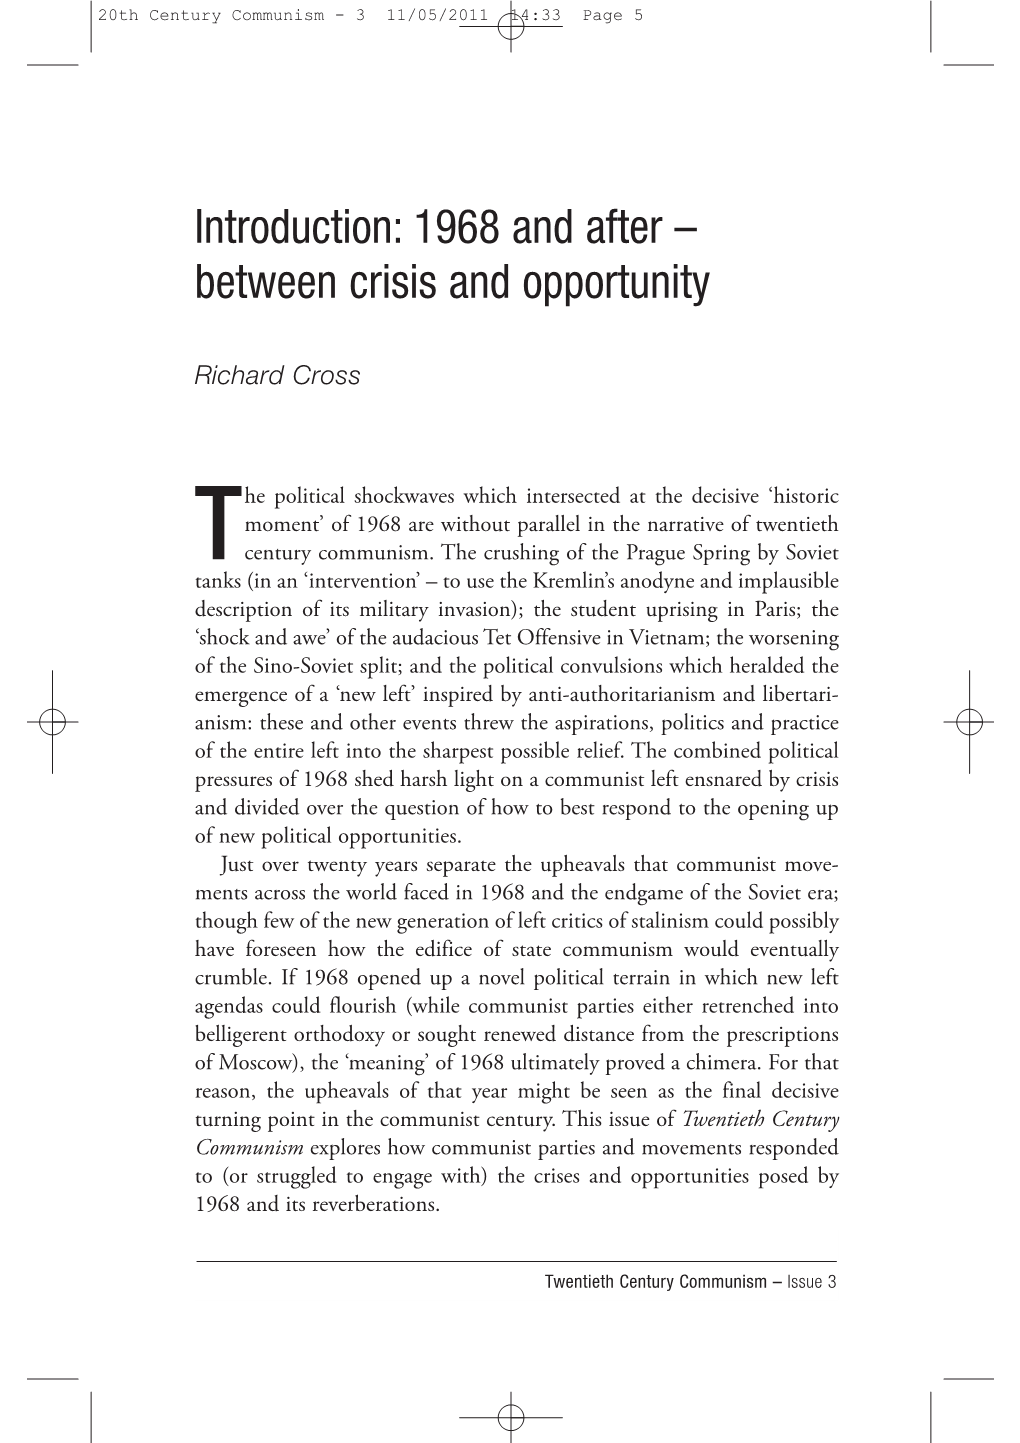 1968 and After – Between Crisis and Opportunity